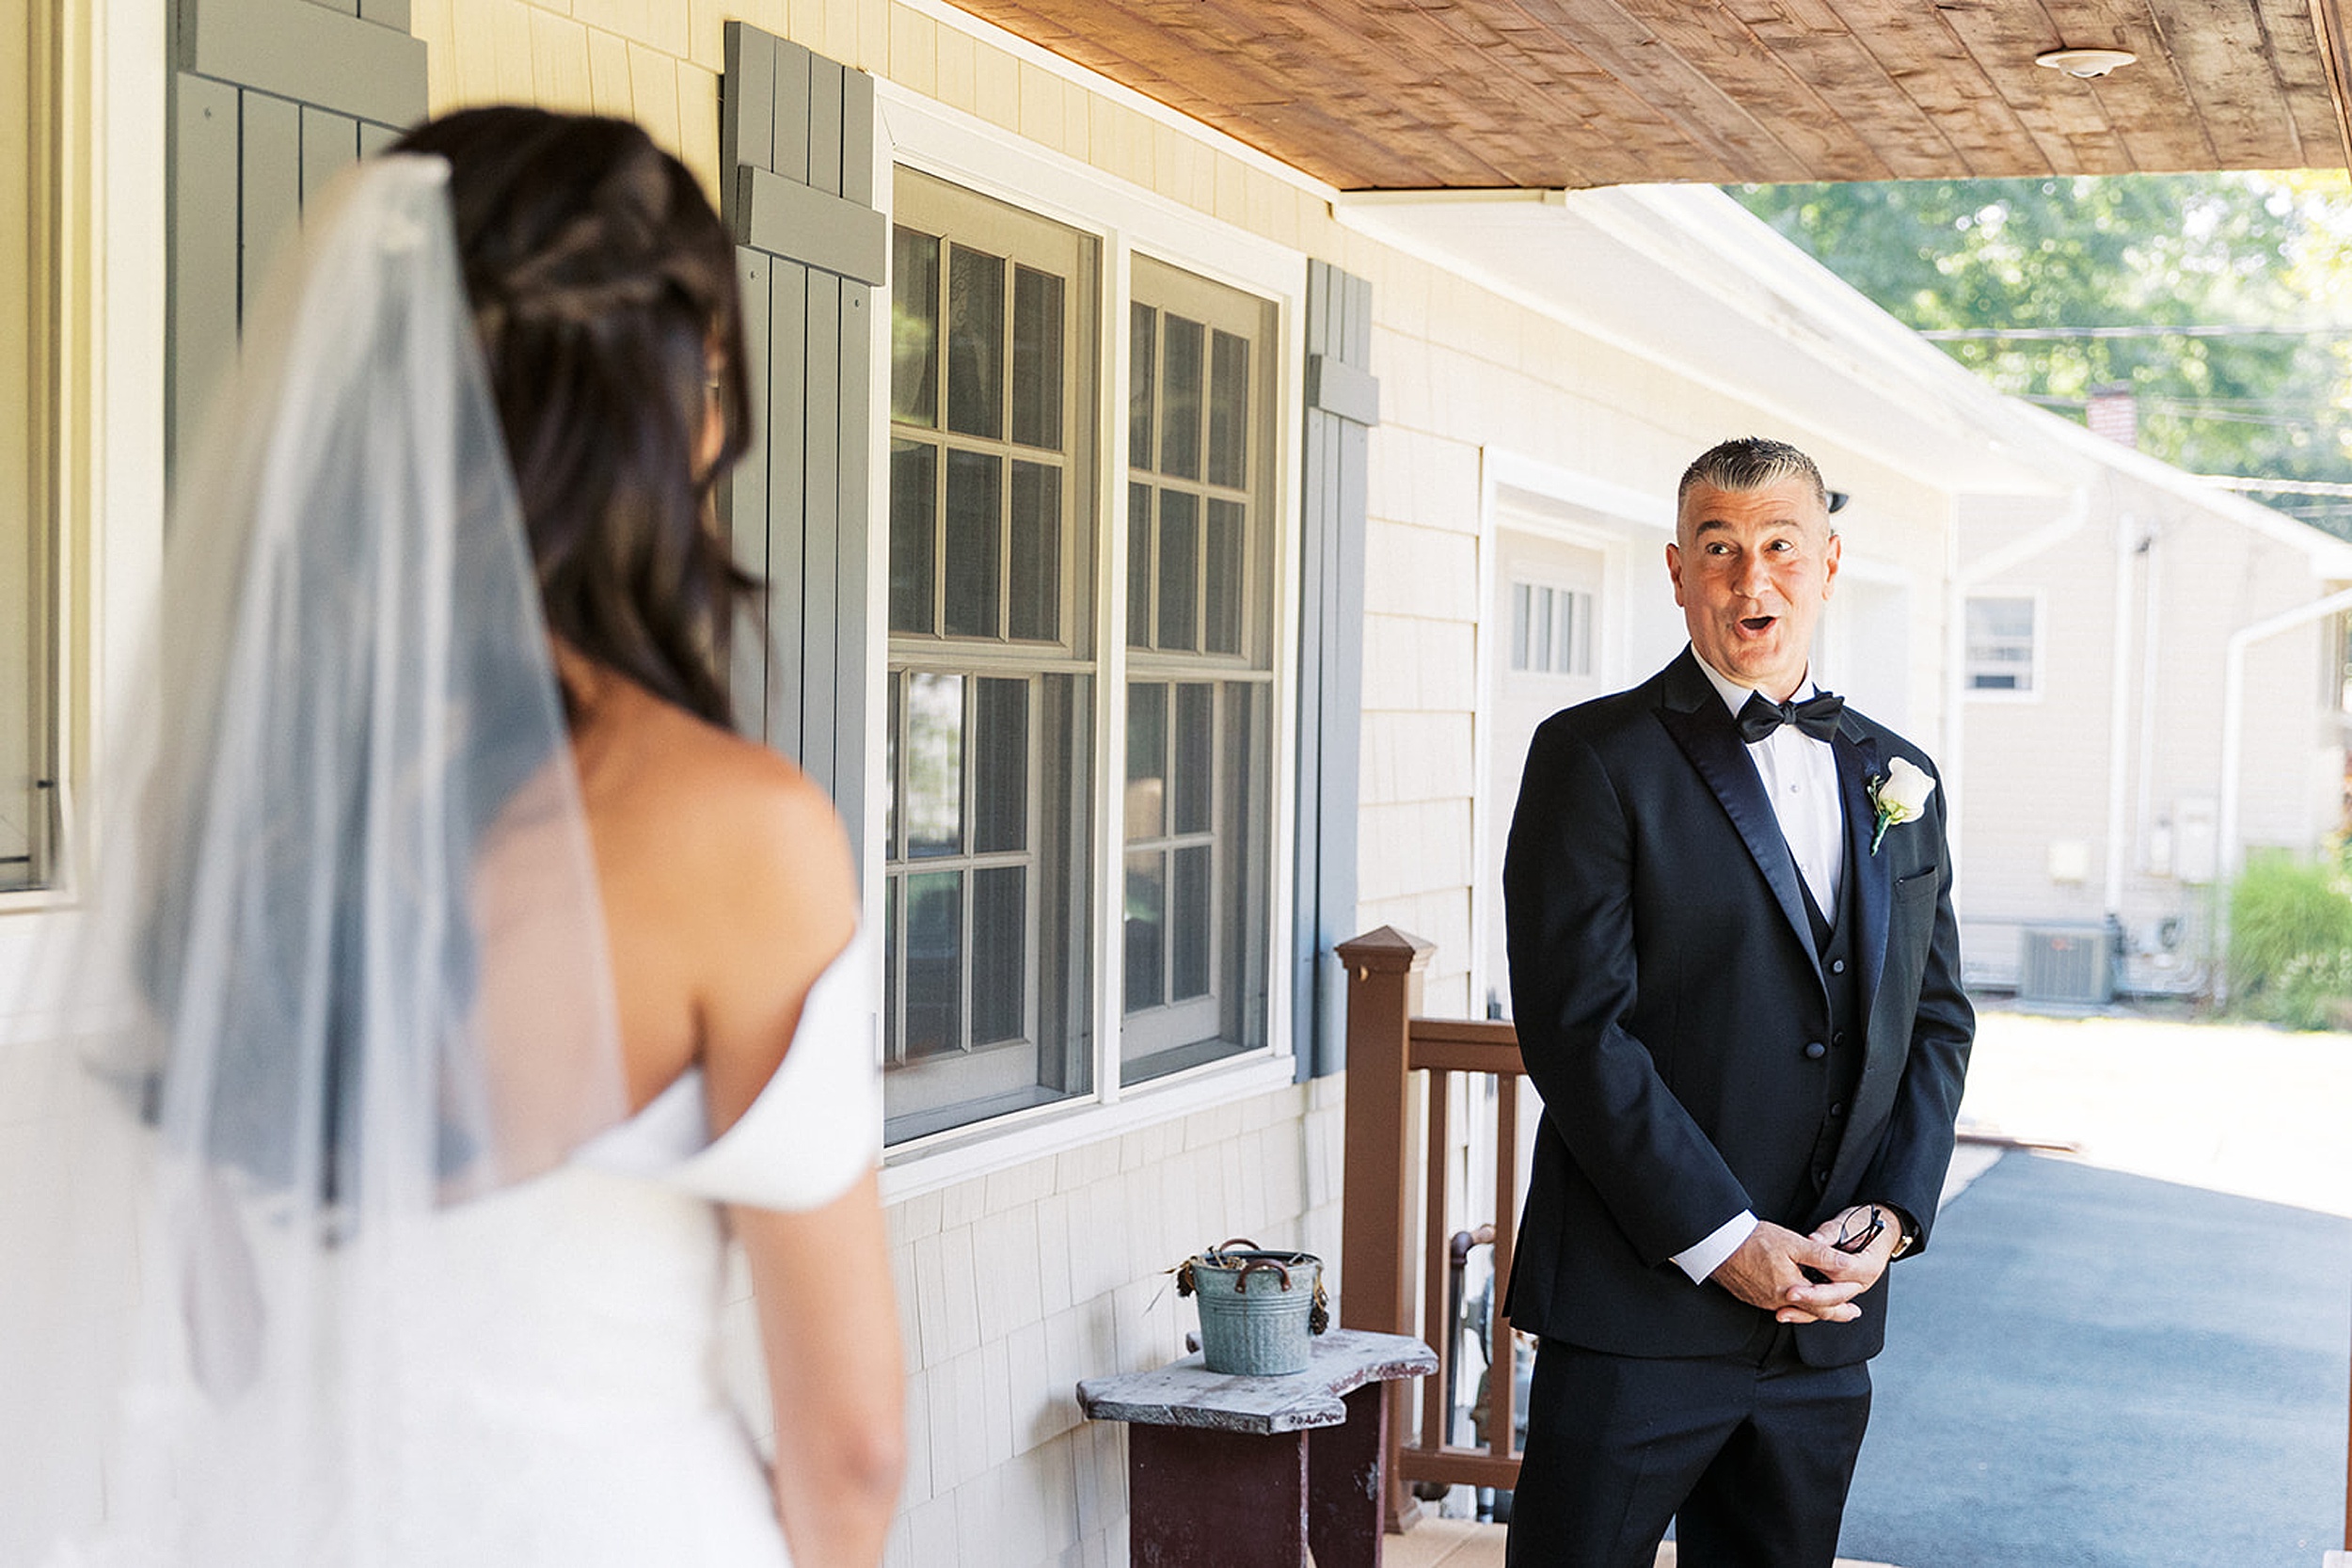 A father sees his daughter in her wedding dress for the first time on a porch